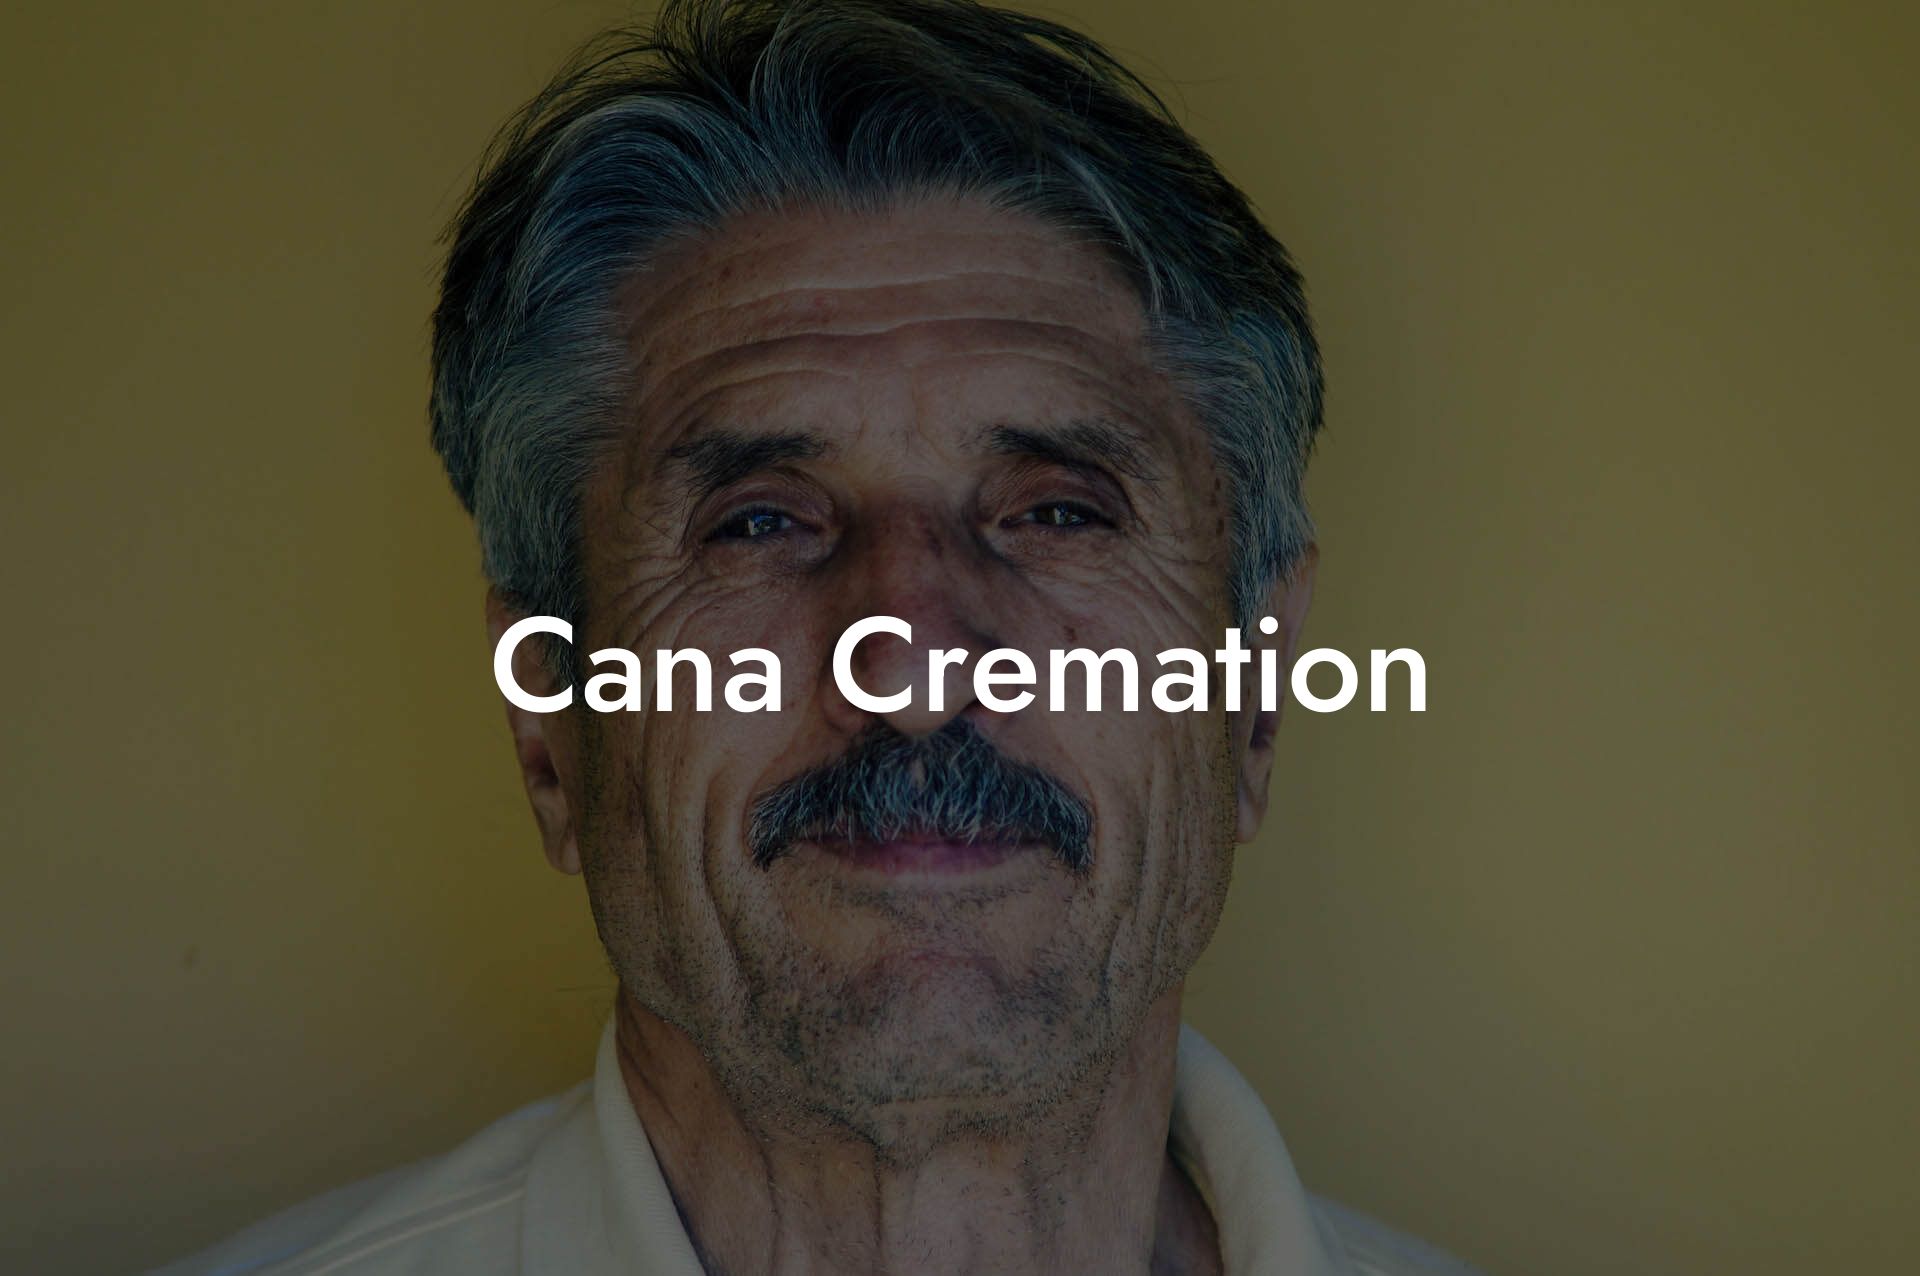 Cana Cremation